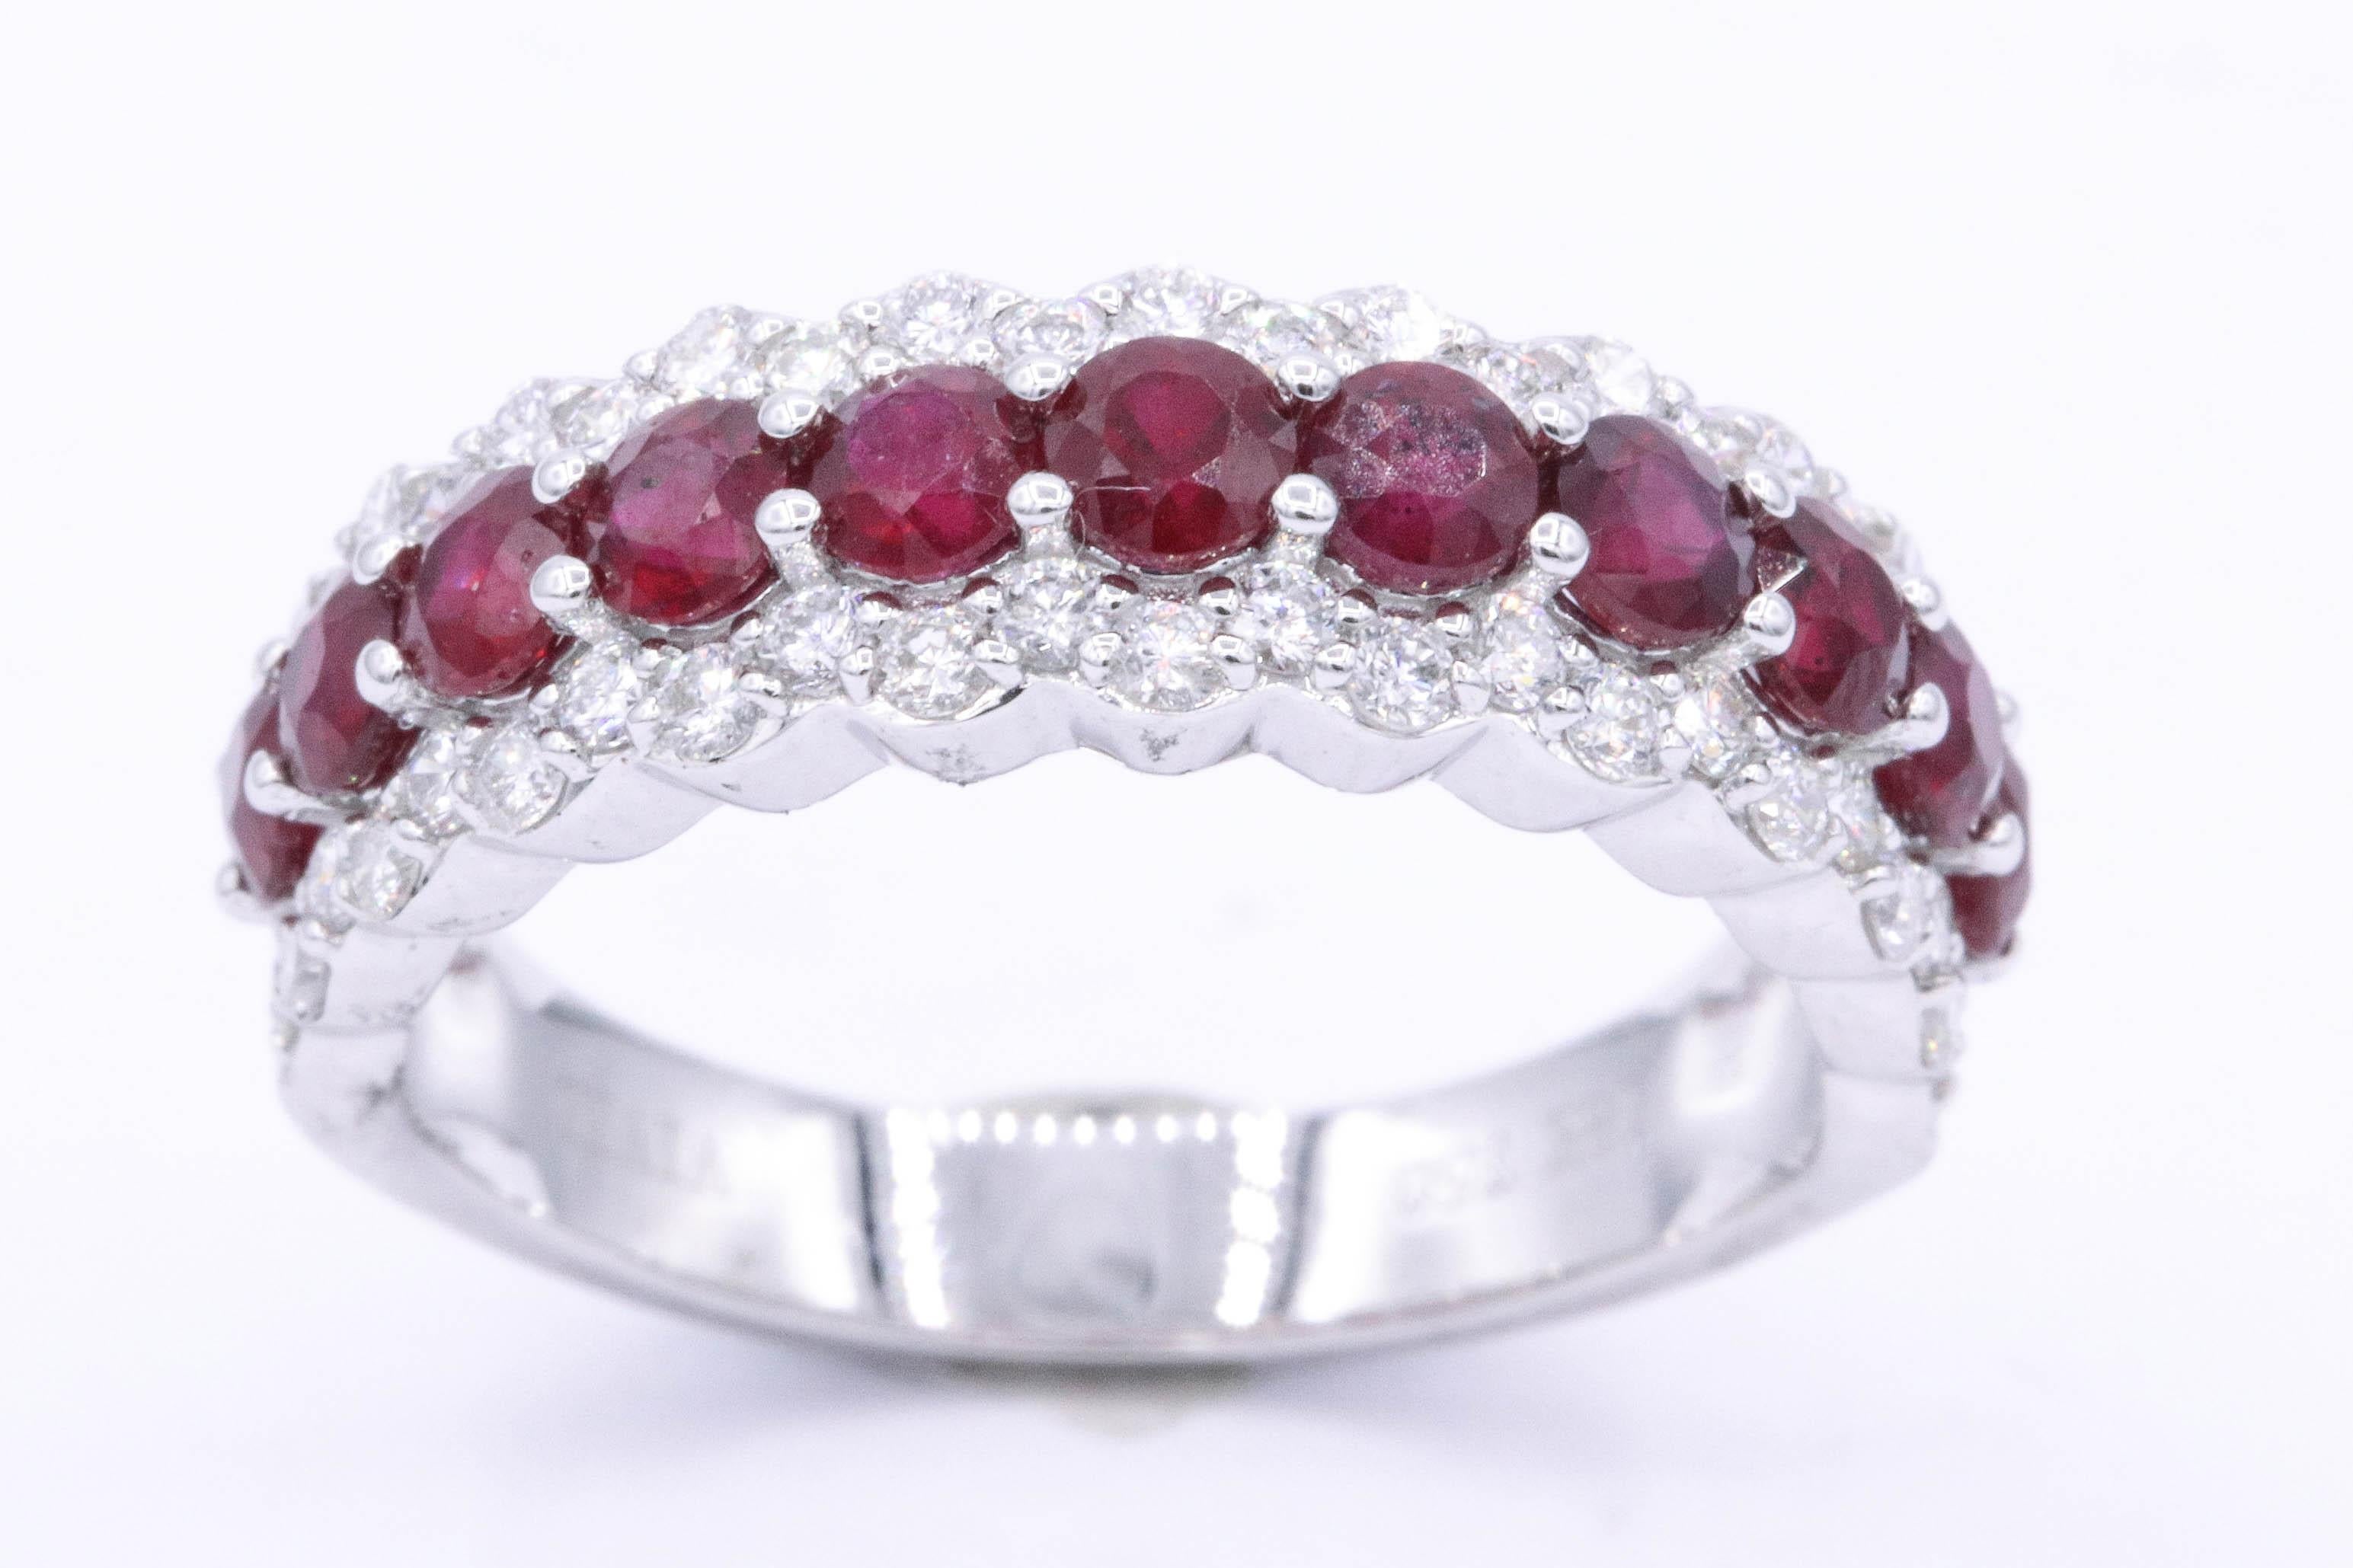 18k White gold wedding band featuring 11 red round Rubies weighing 1.10 Carats flanked with 50 round diamonds weighing 0.60 carats. Color G-H Clarity SI
6.25 mm width 